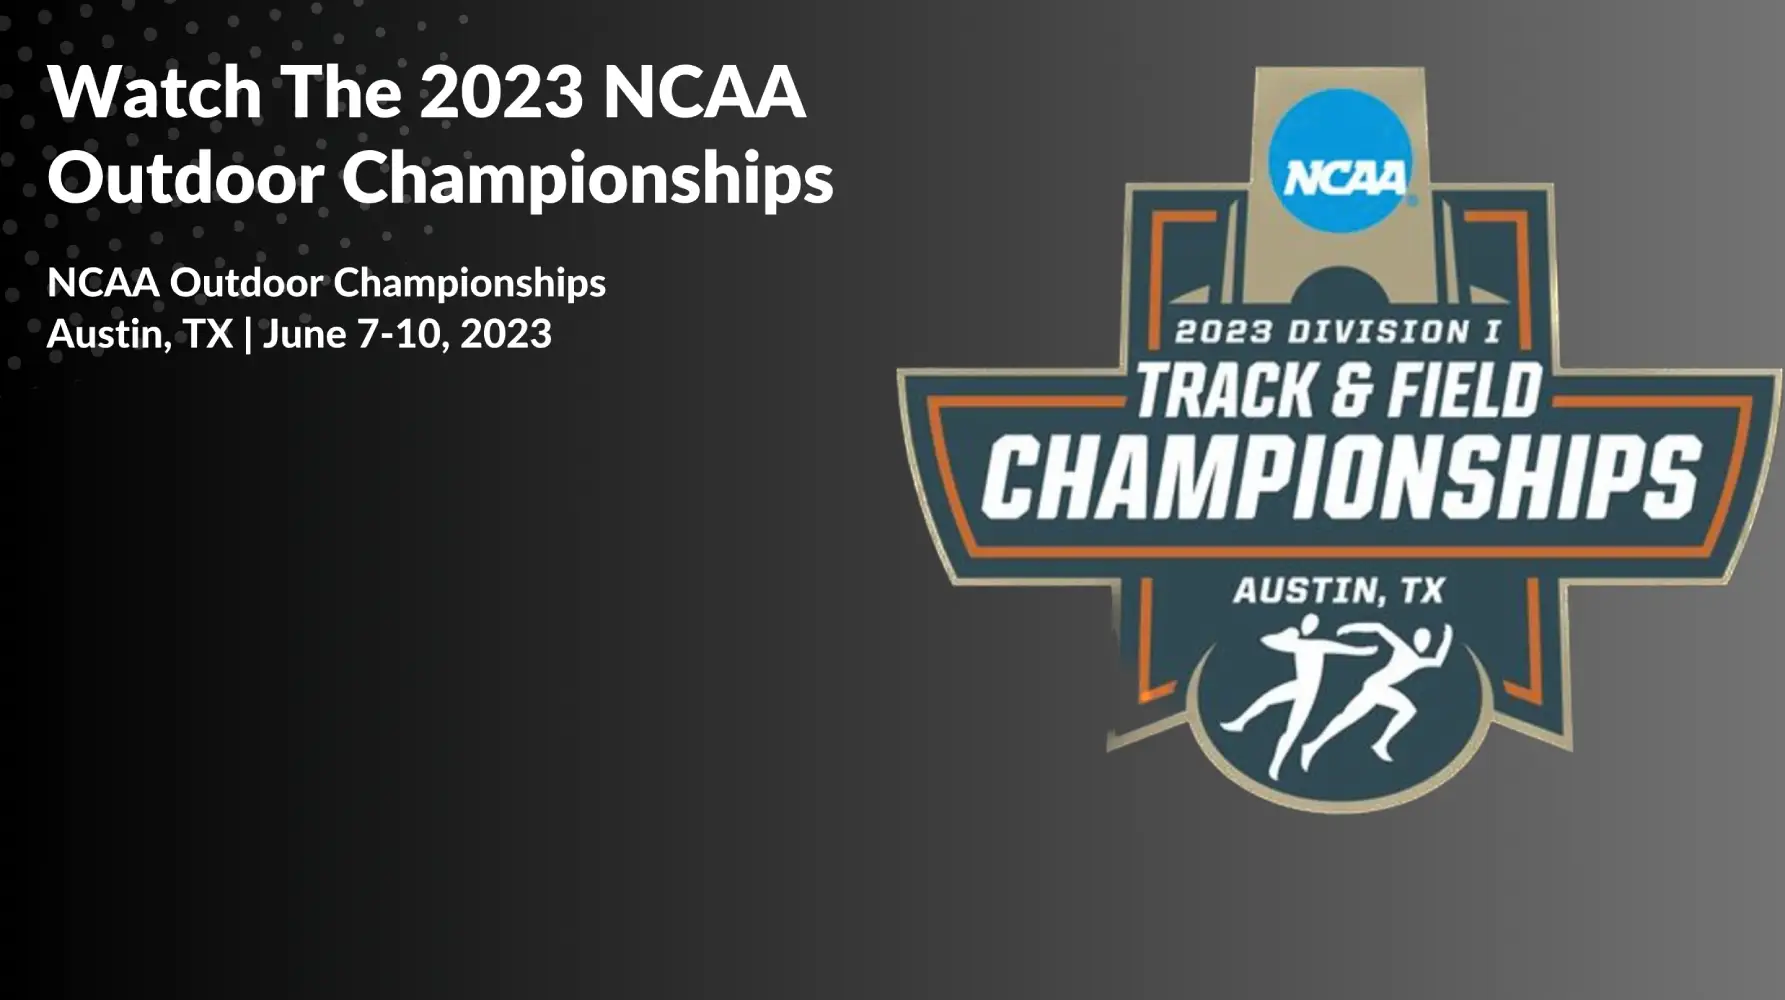 Watch the 2023 NCAA Outdoor Track and Field Championships